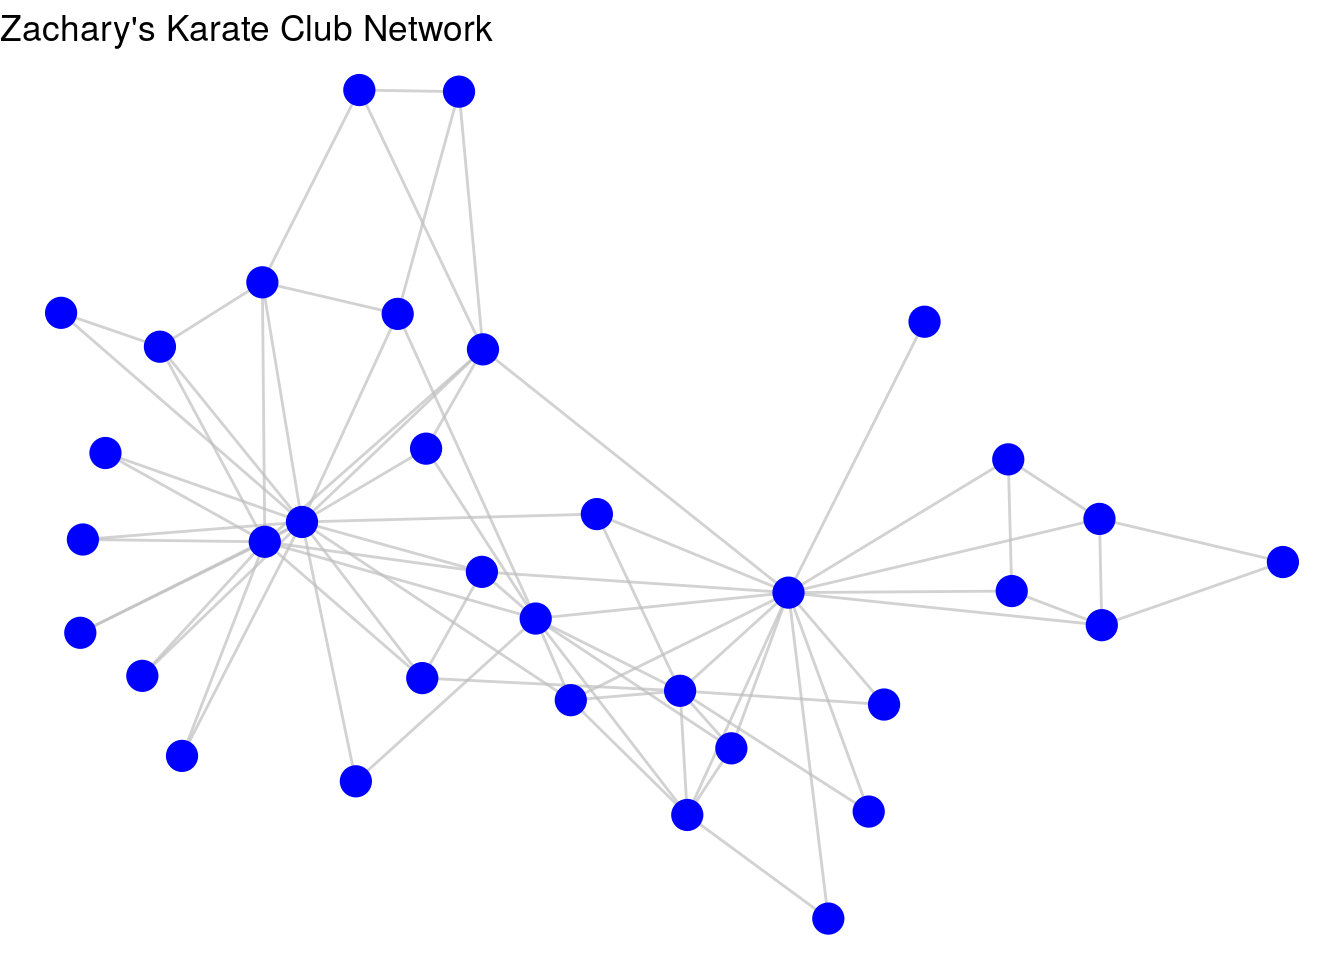 Improved visualization of `karate` graph using node and edge geom functions